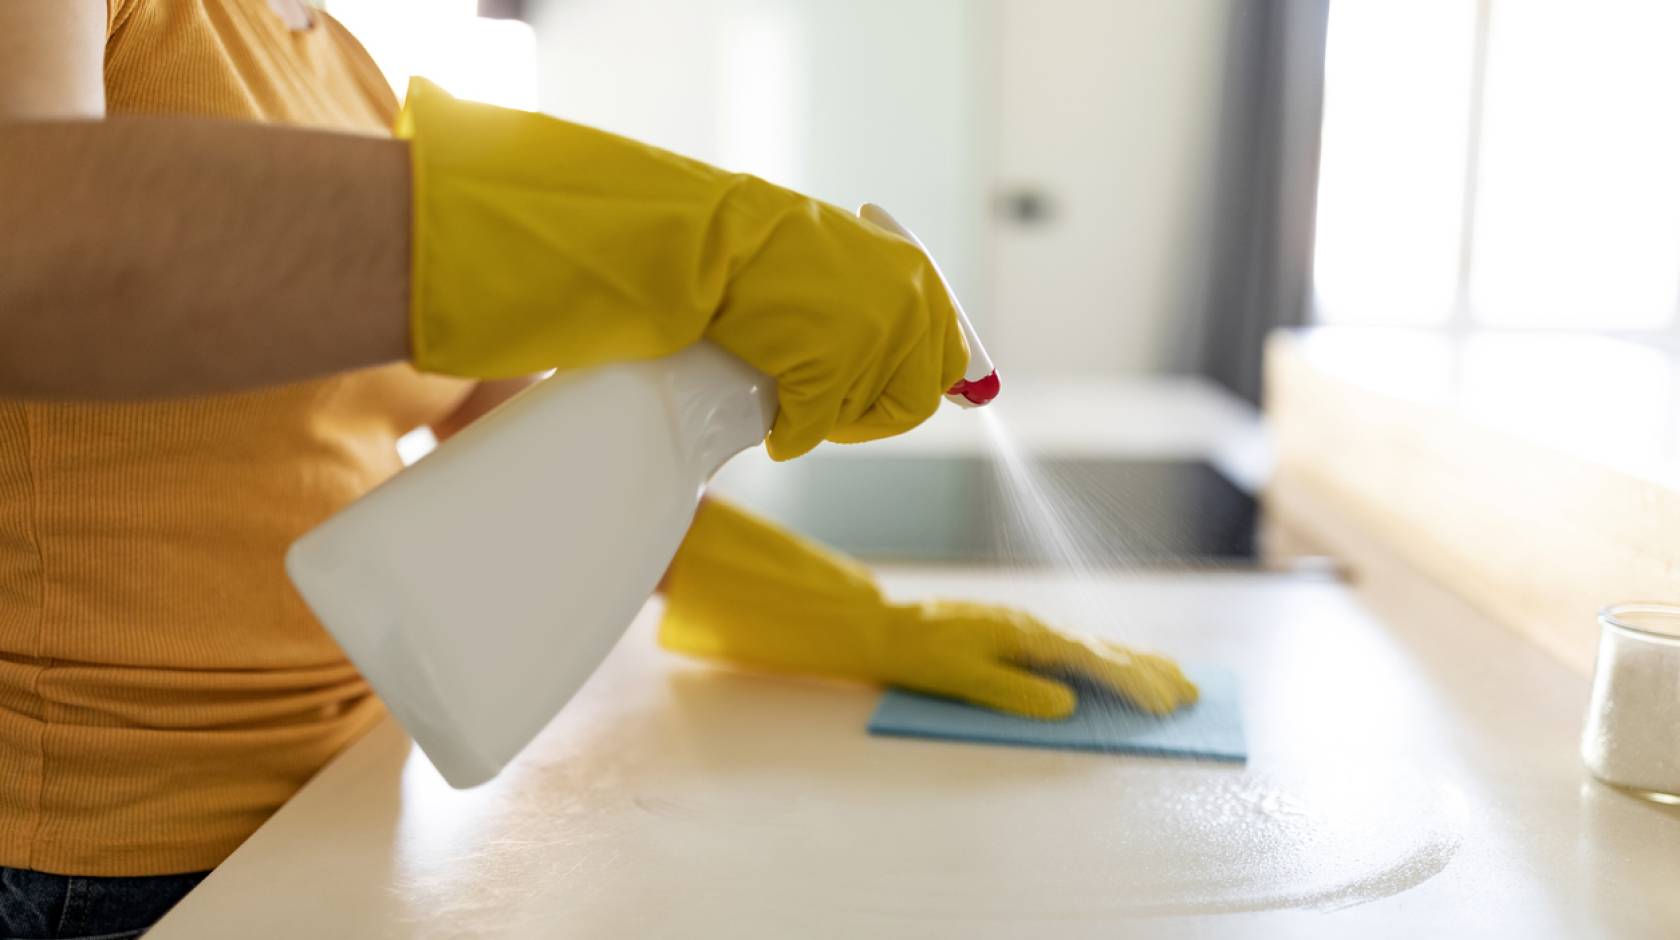 A woman wearing a peach shirt and yellow rubber gloves uses an unmarked spray bottle to clean a kitchen counter with a rag.